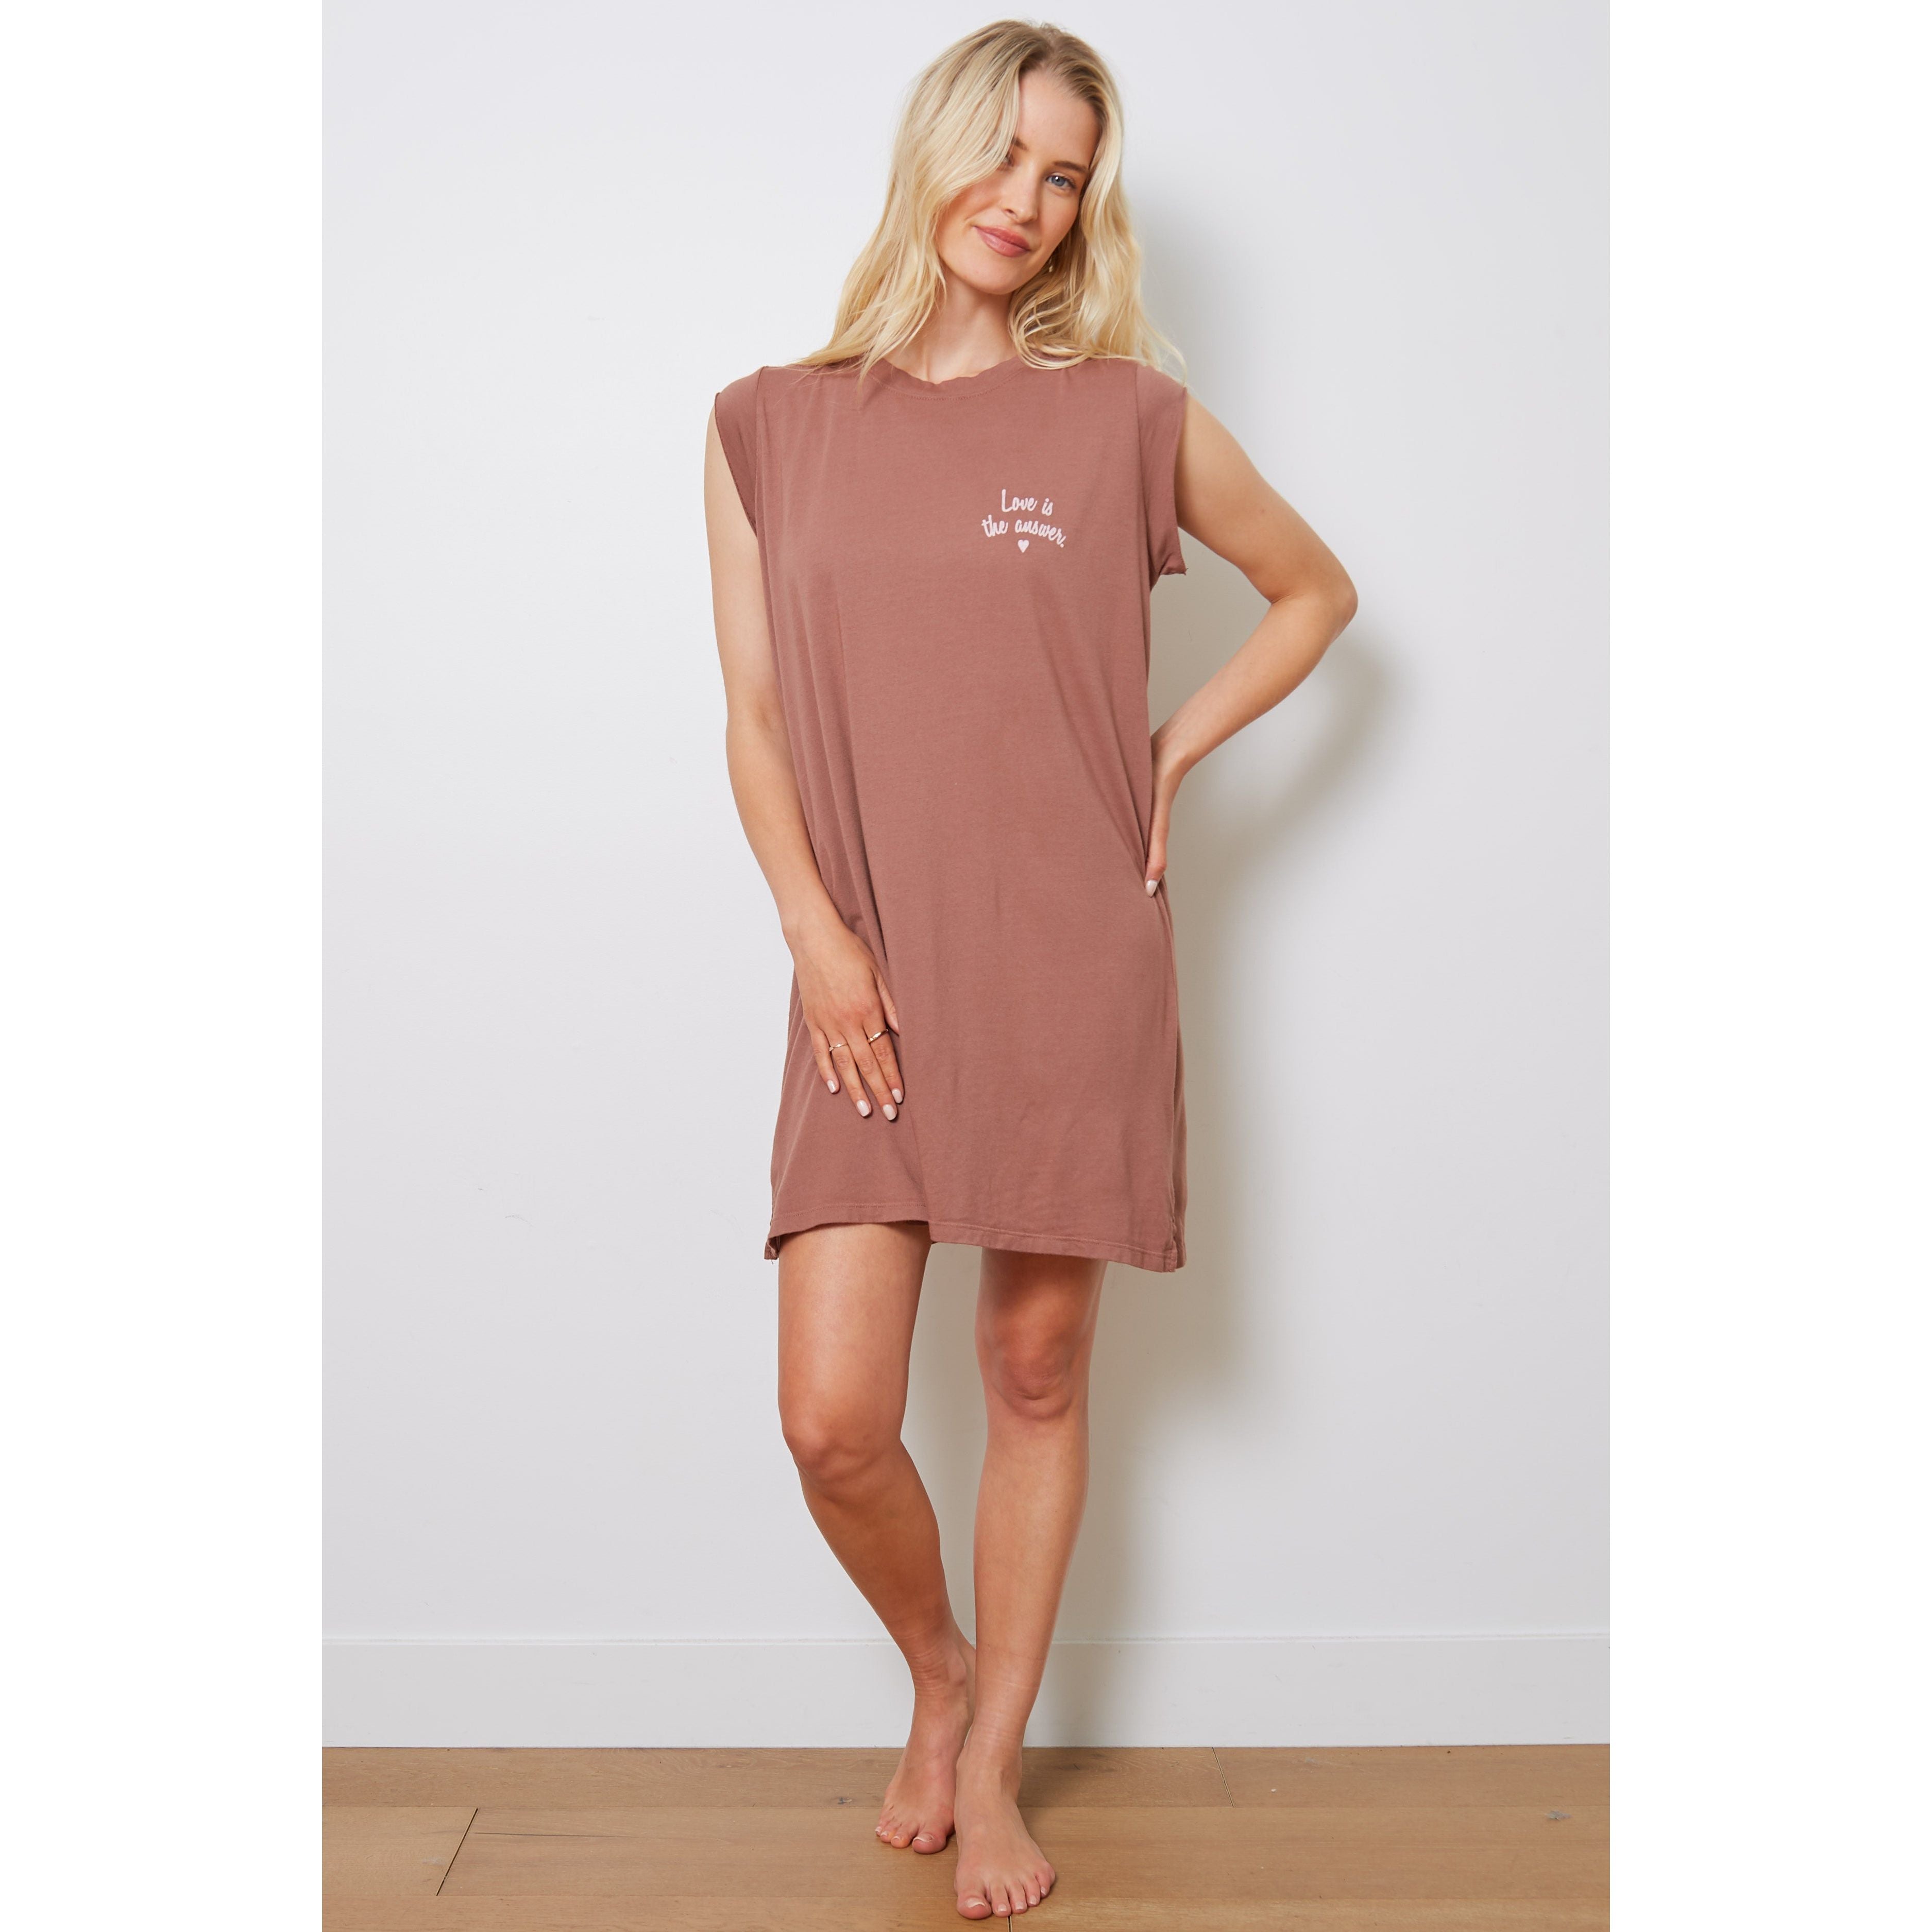 Good Hyouman - Love is the Answer Lani Dress in Coconut Shell